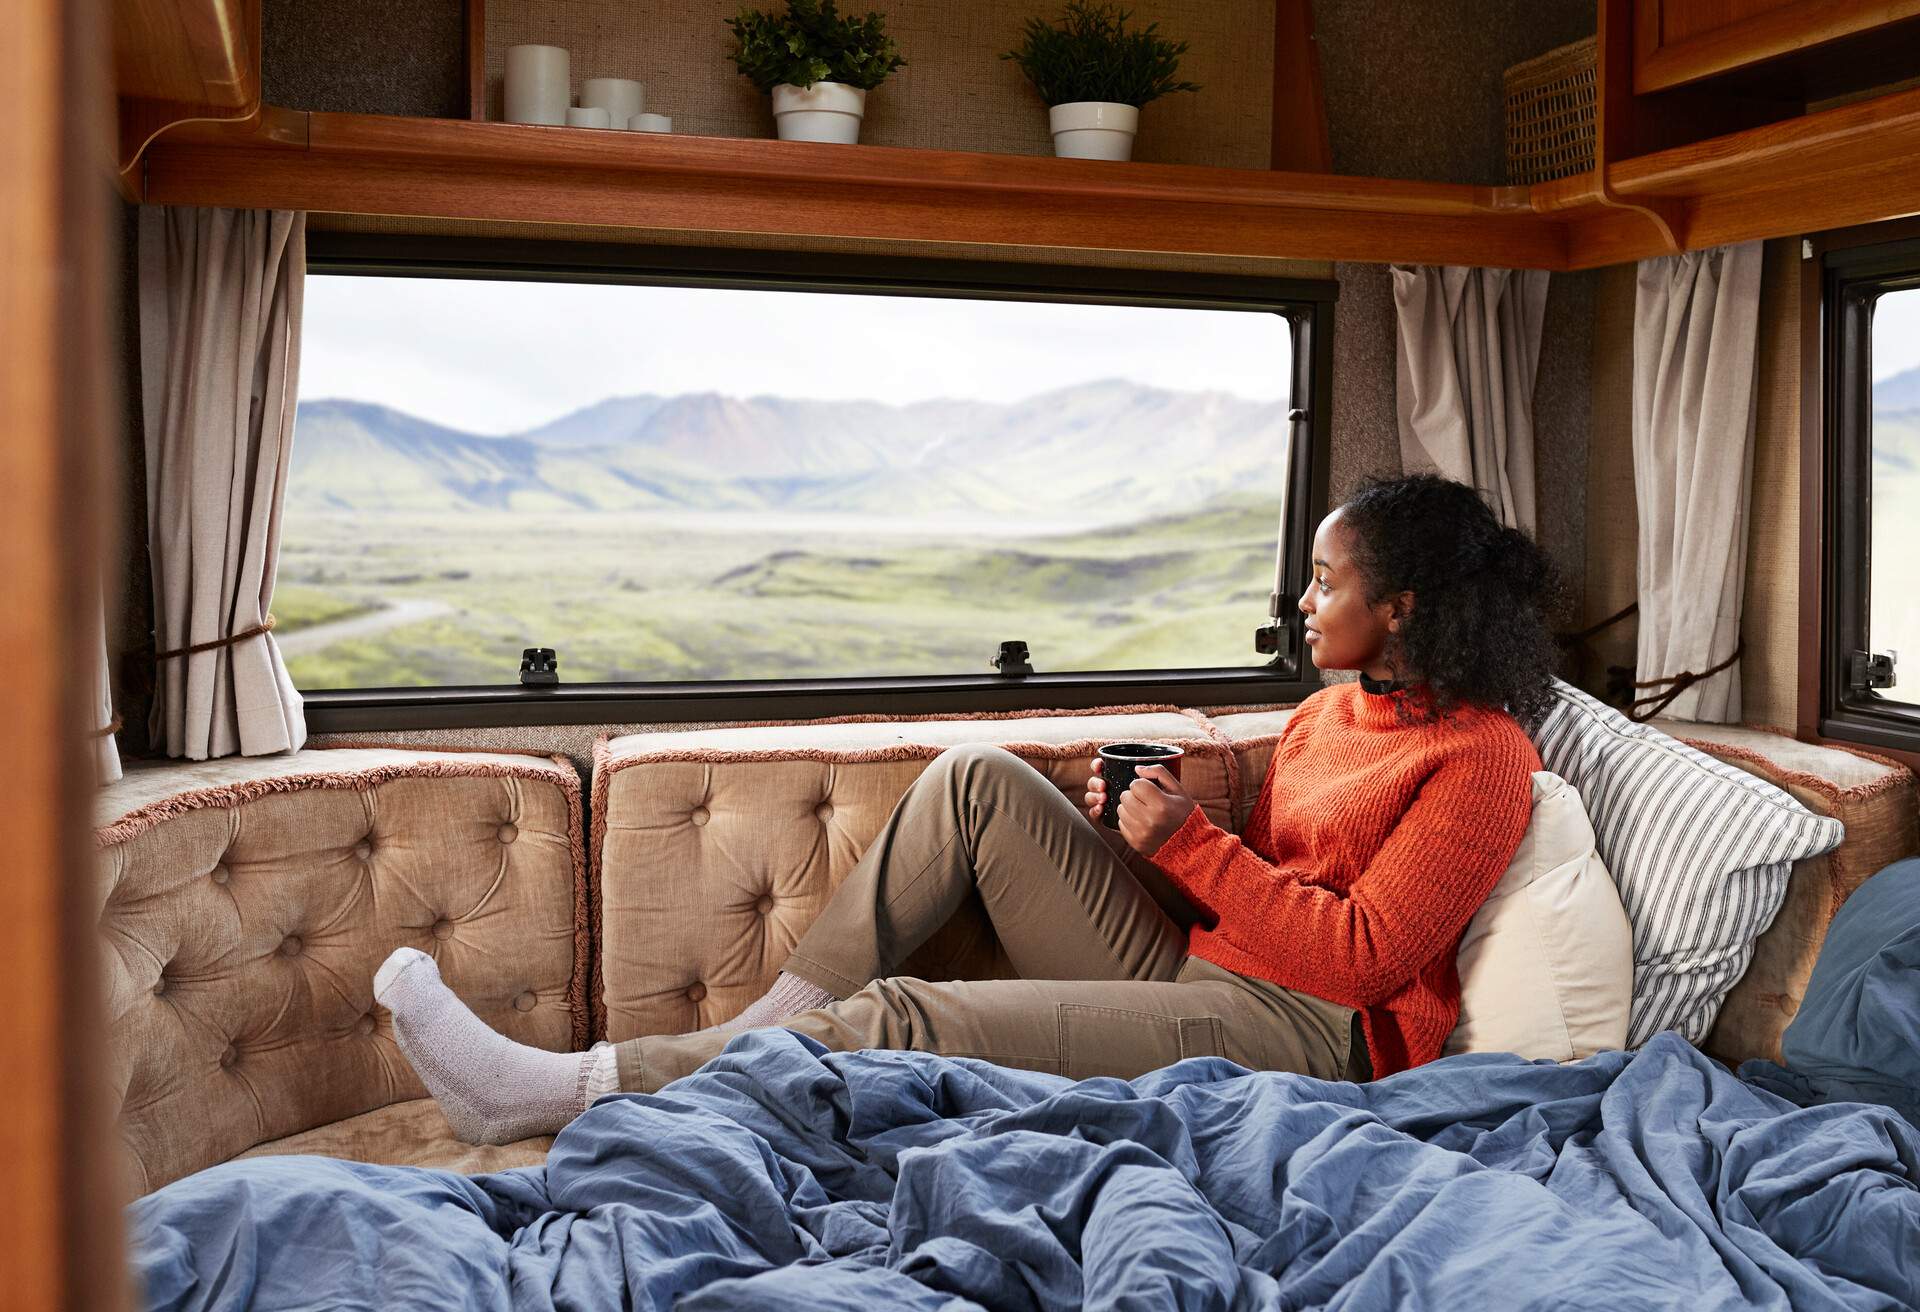 Contemplating woman with coffee cup sitting on bed in camper van